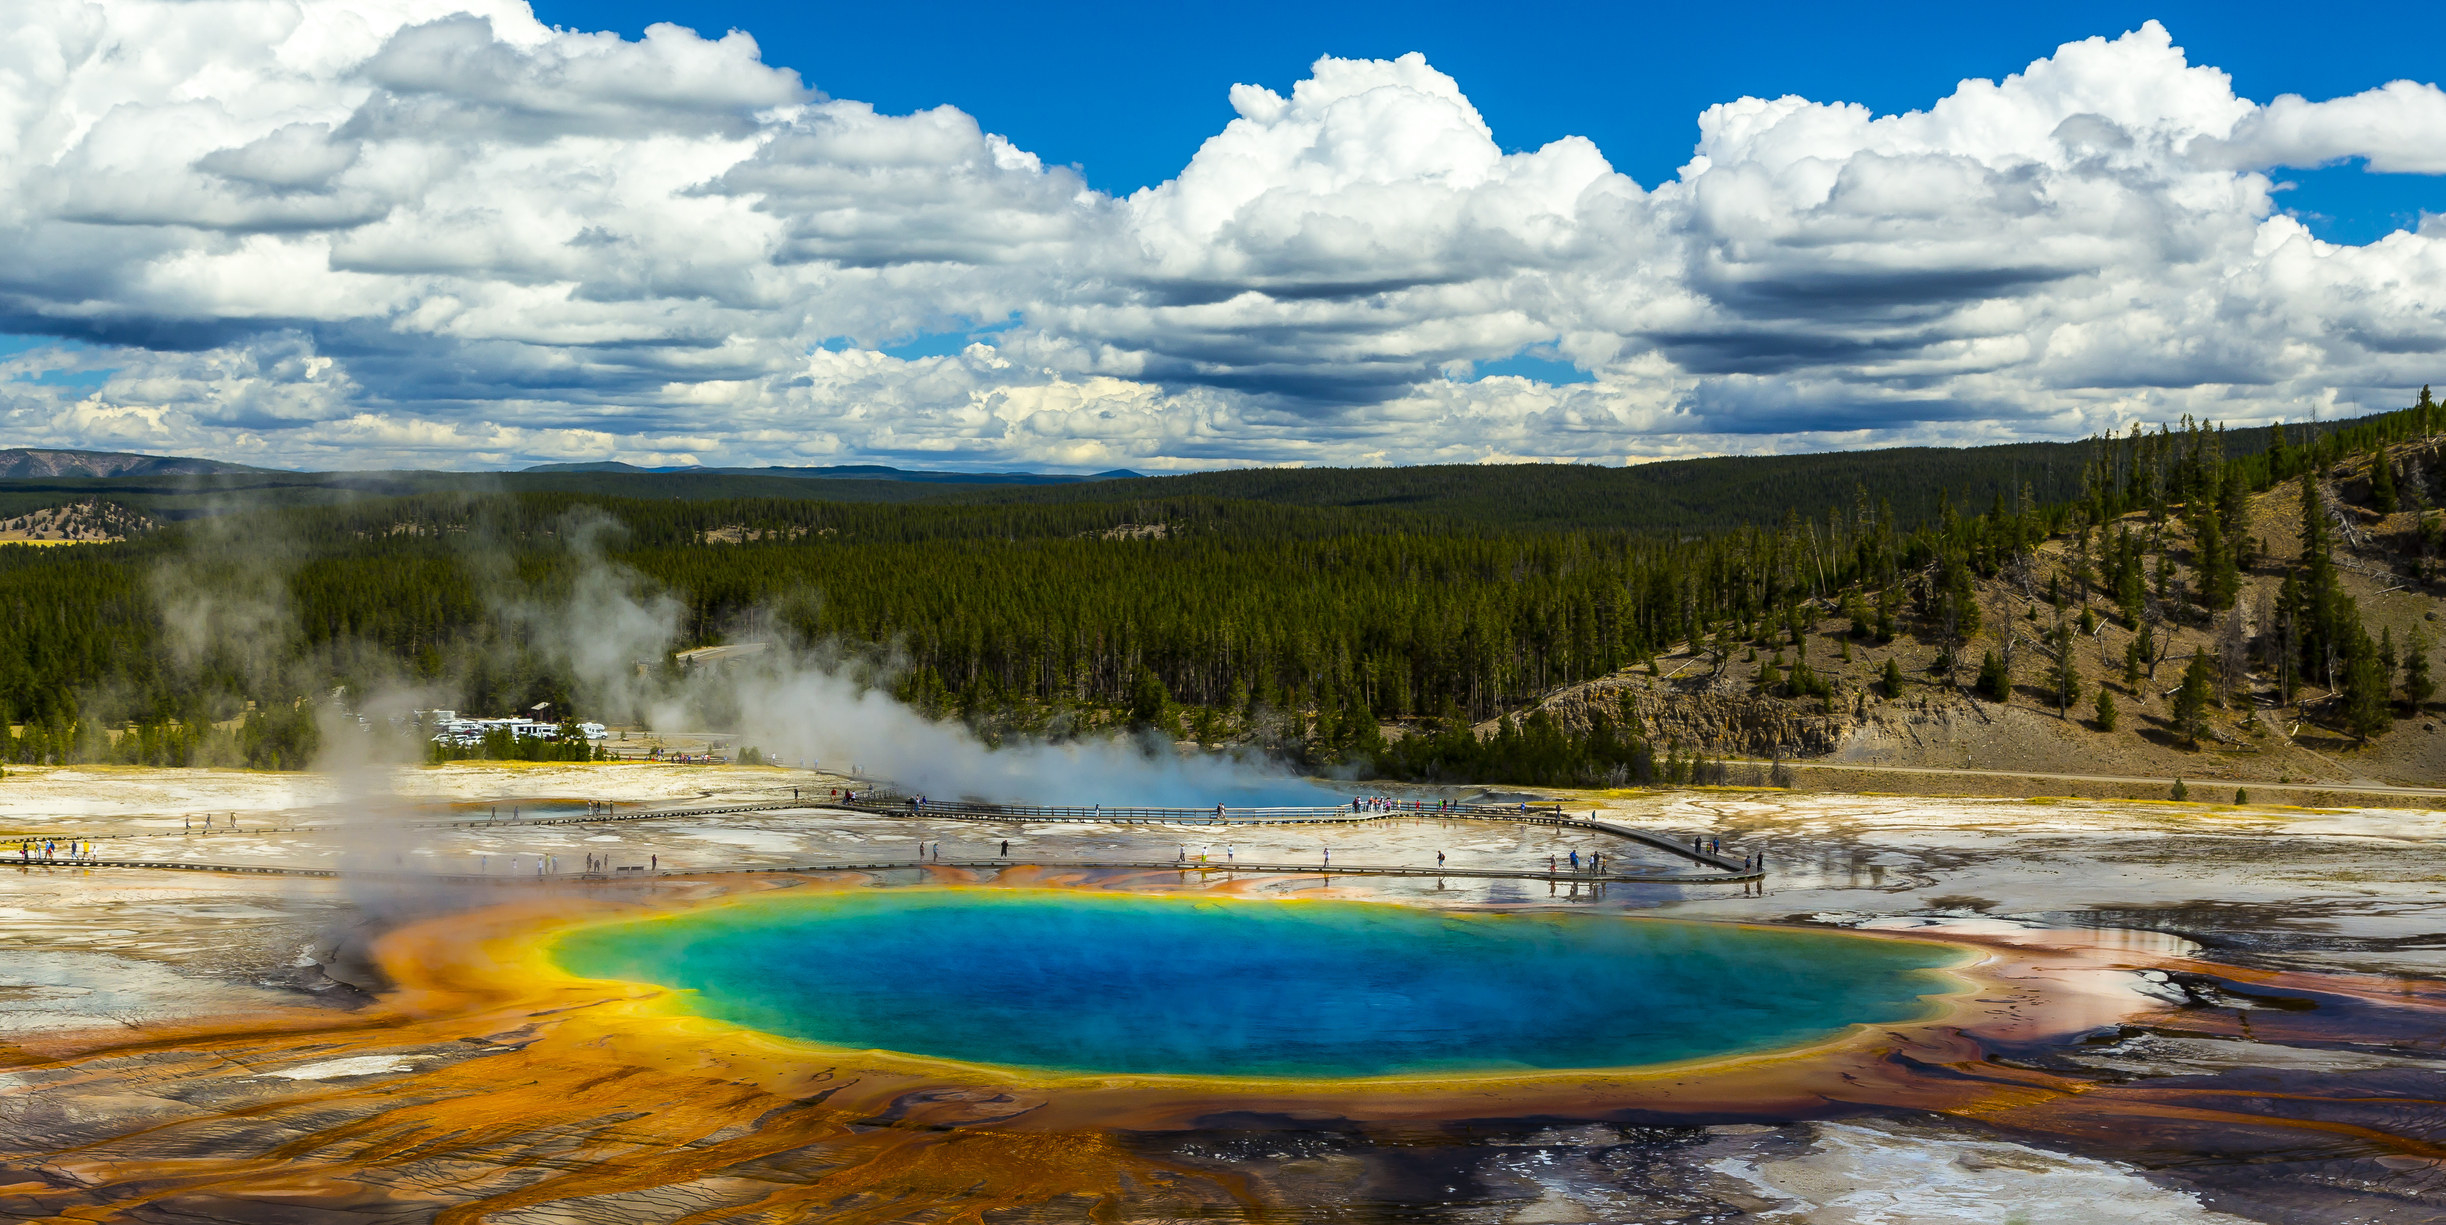 The Grand Prismatic Spring in Yellowstone National Park.